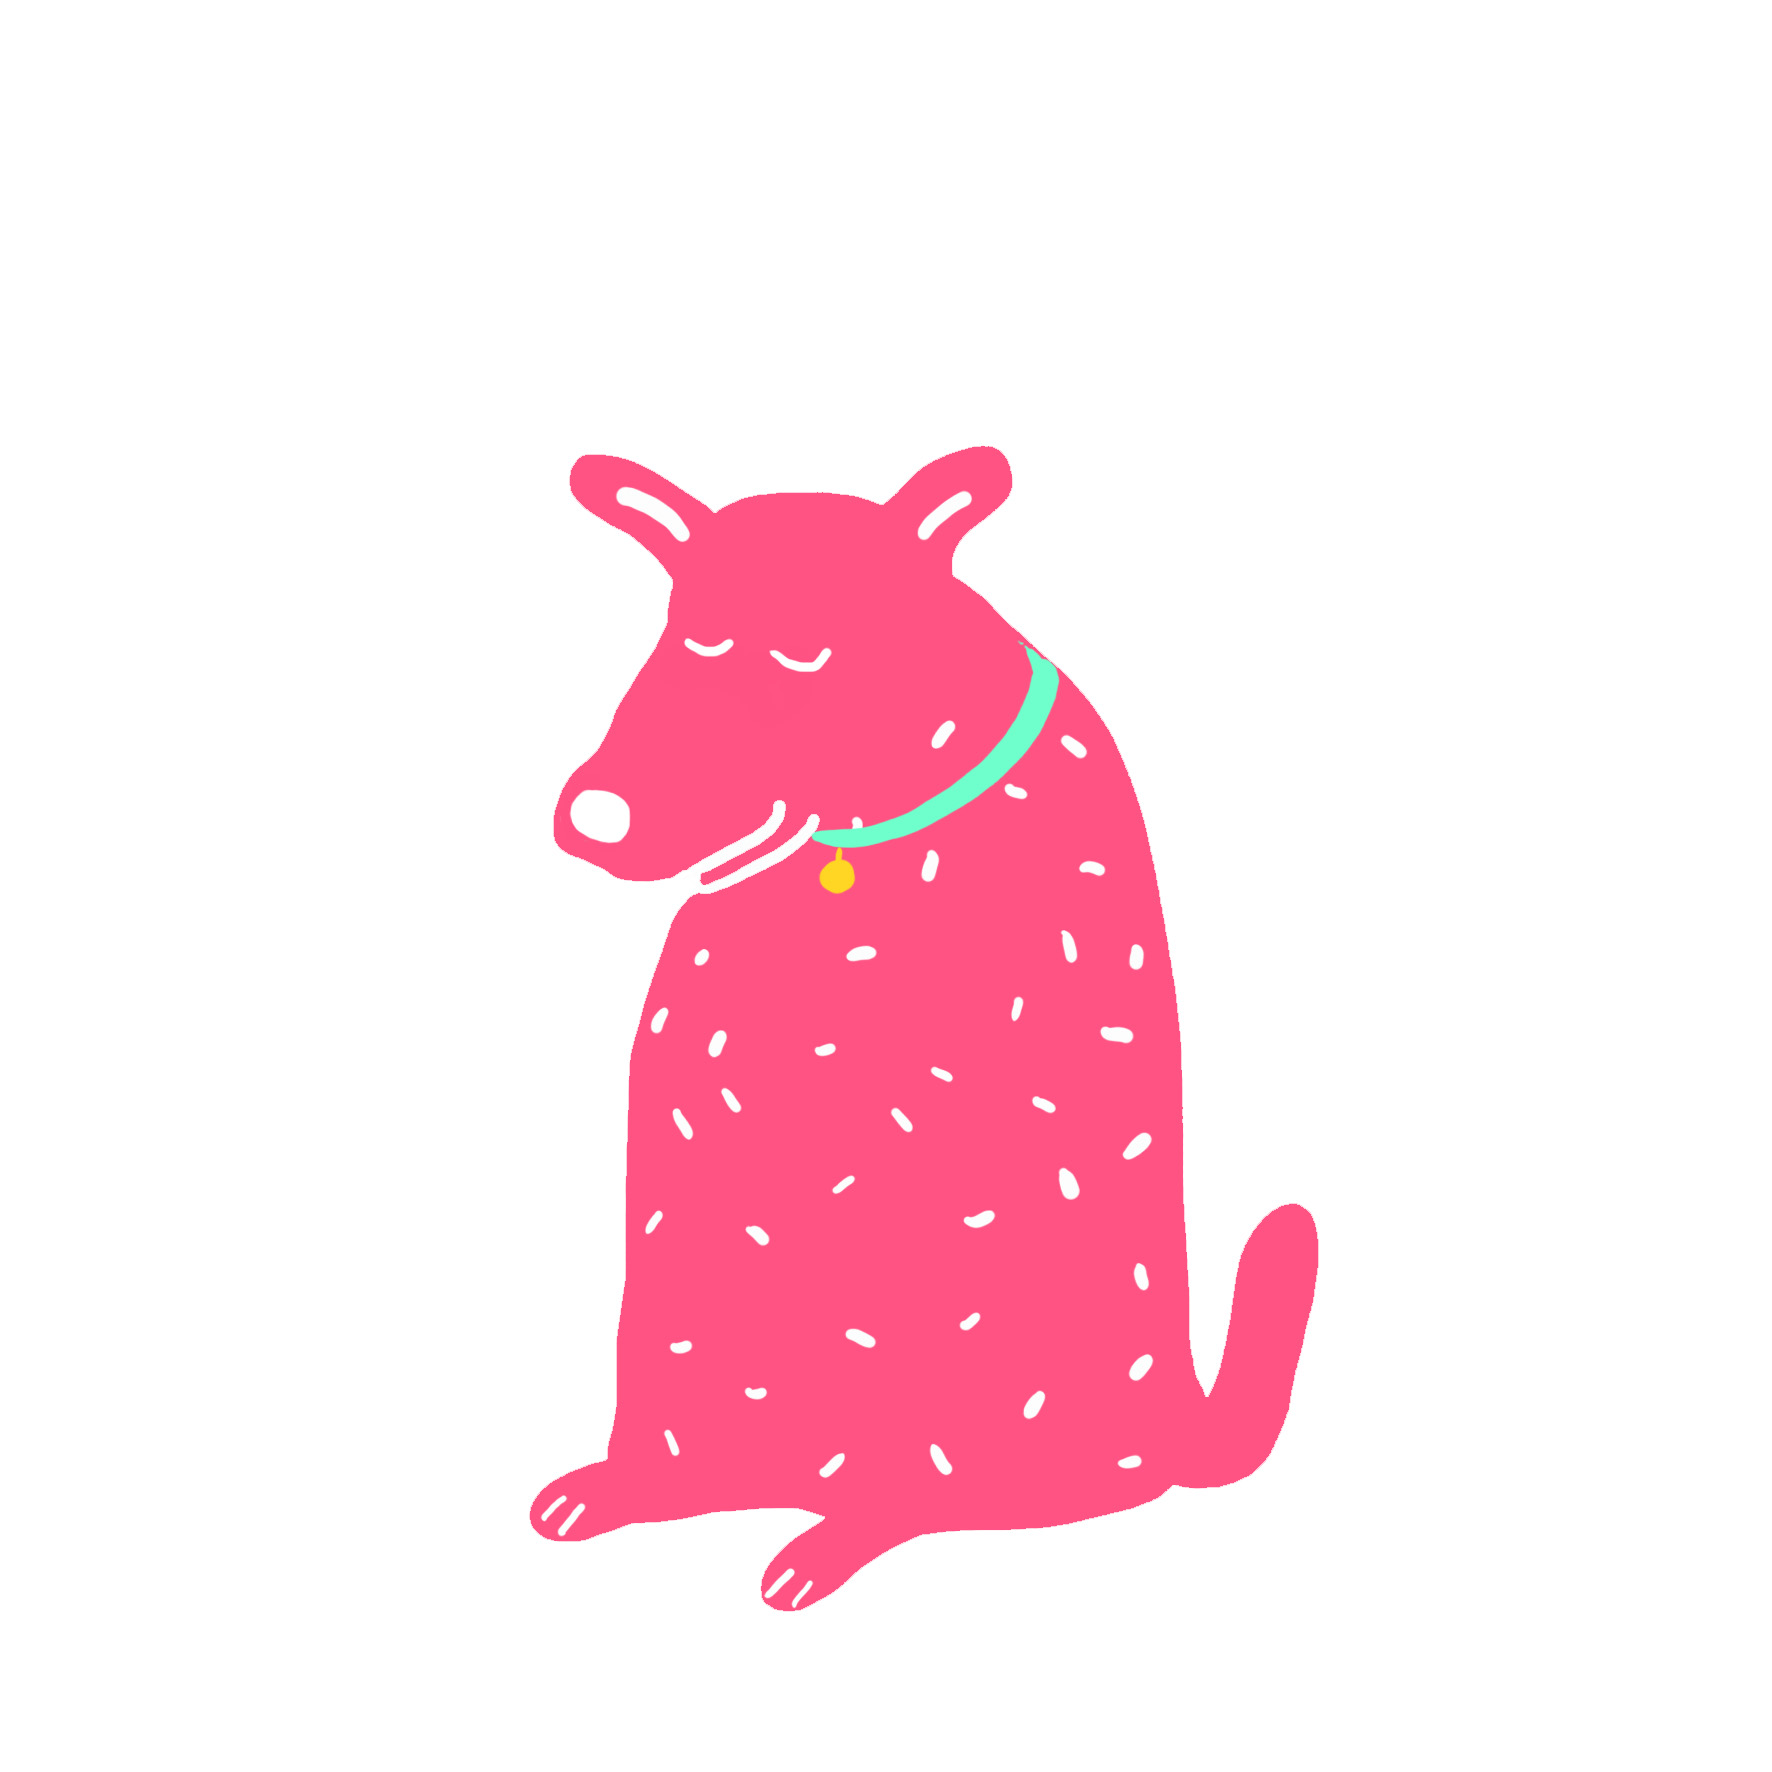 red happy illustrated dog